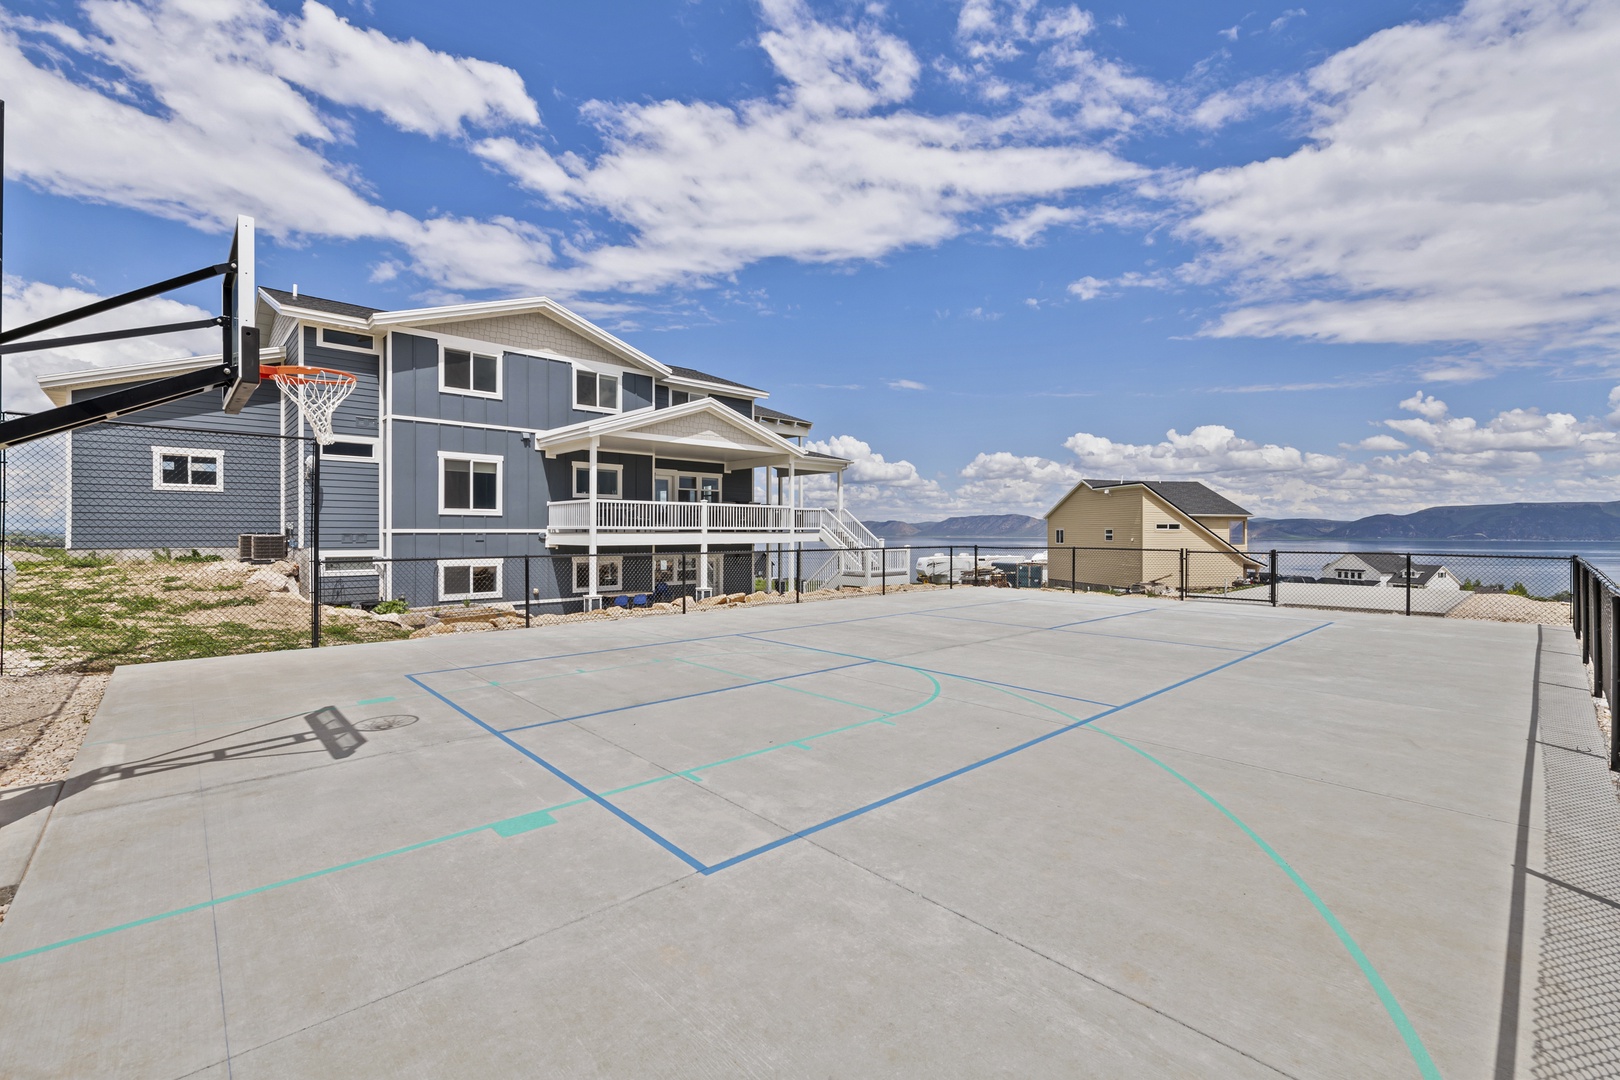 Persimmon Hill-Pickle ball court and basketball court